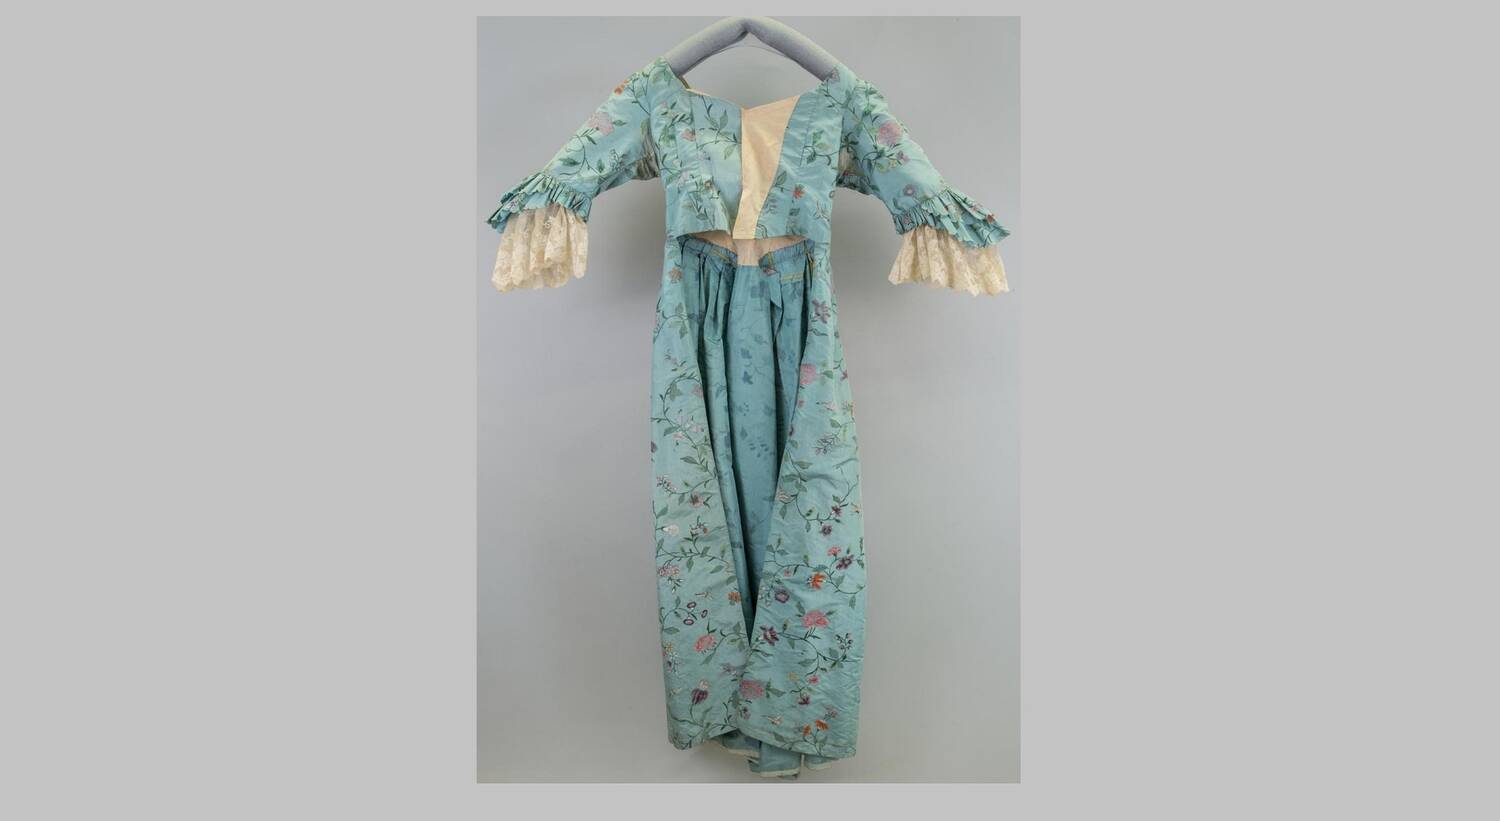 A blue silk dress with a floral pattern hangs from a padded coat hanger in front of a plain grey background. The short sleeves are finished with lace wide cuffs, and the bodice opens slightly at the front.